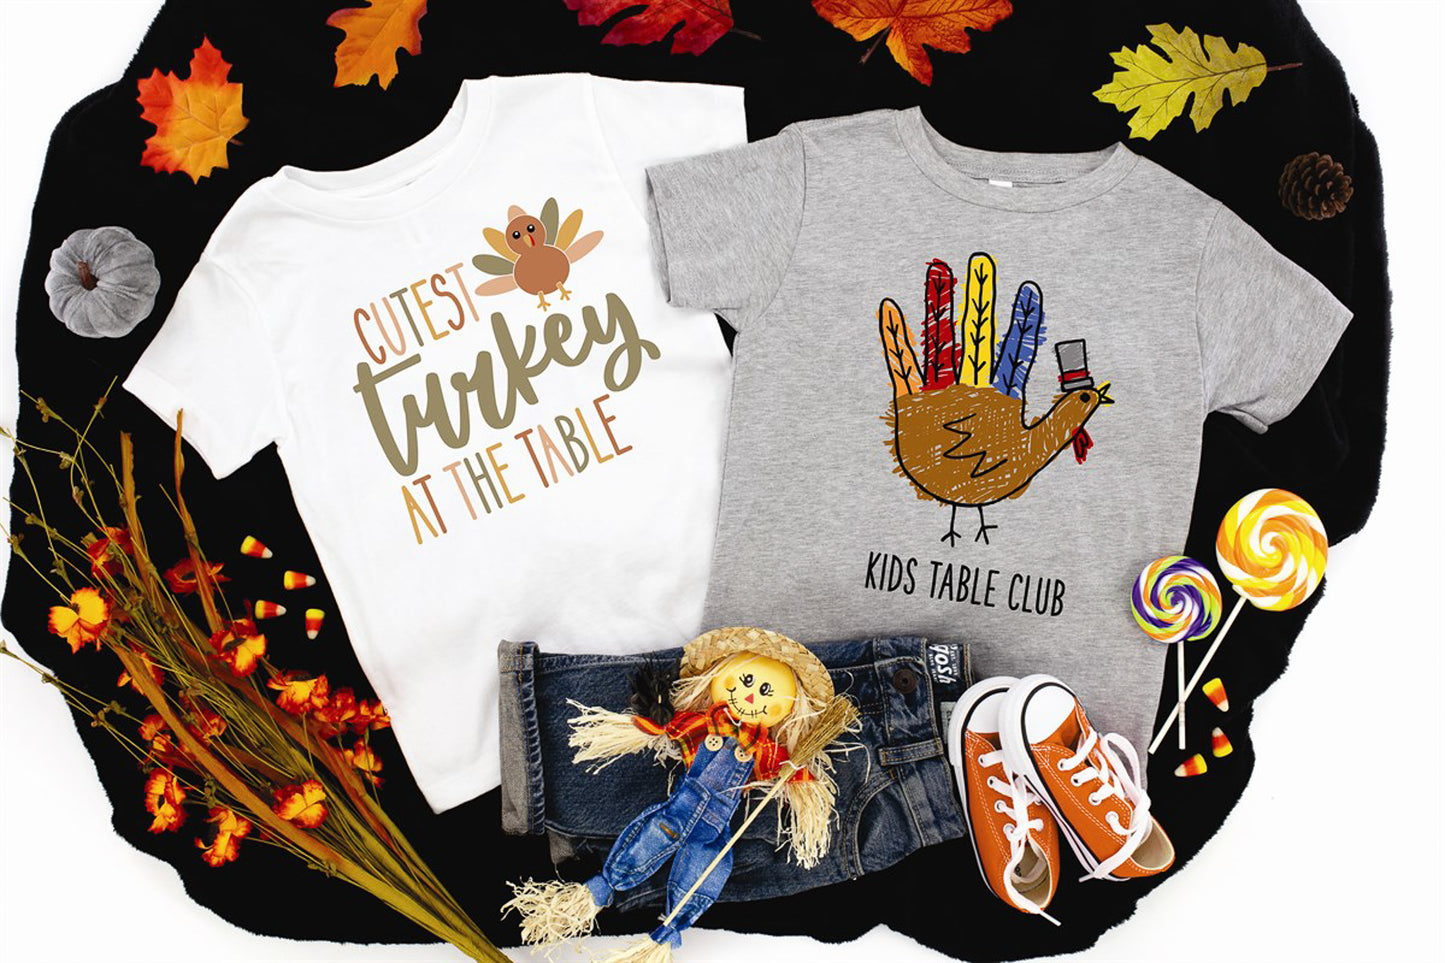 Cutest Turkey At The Table Tee